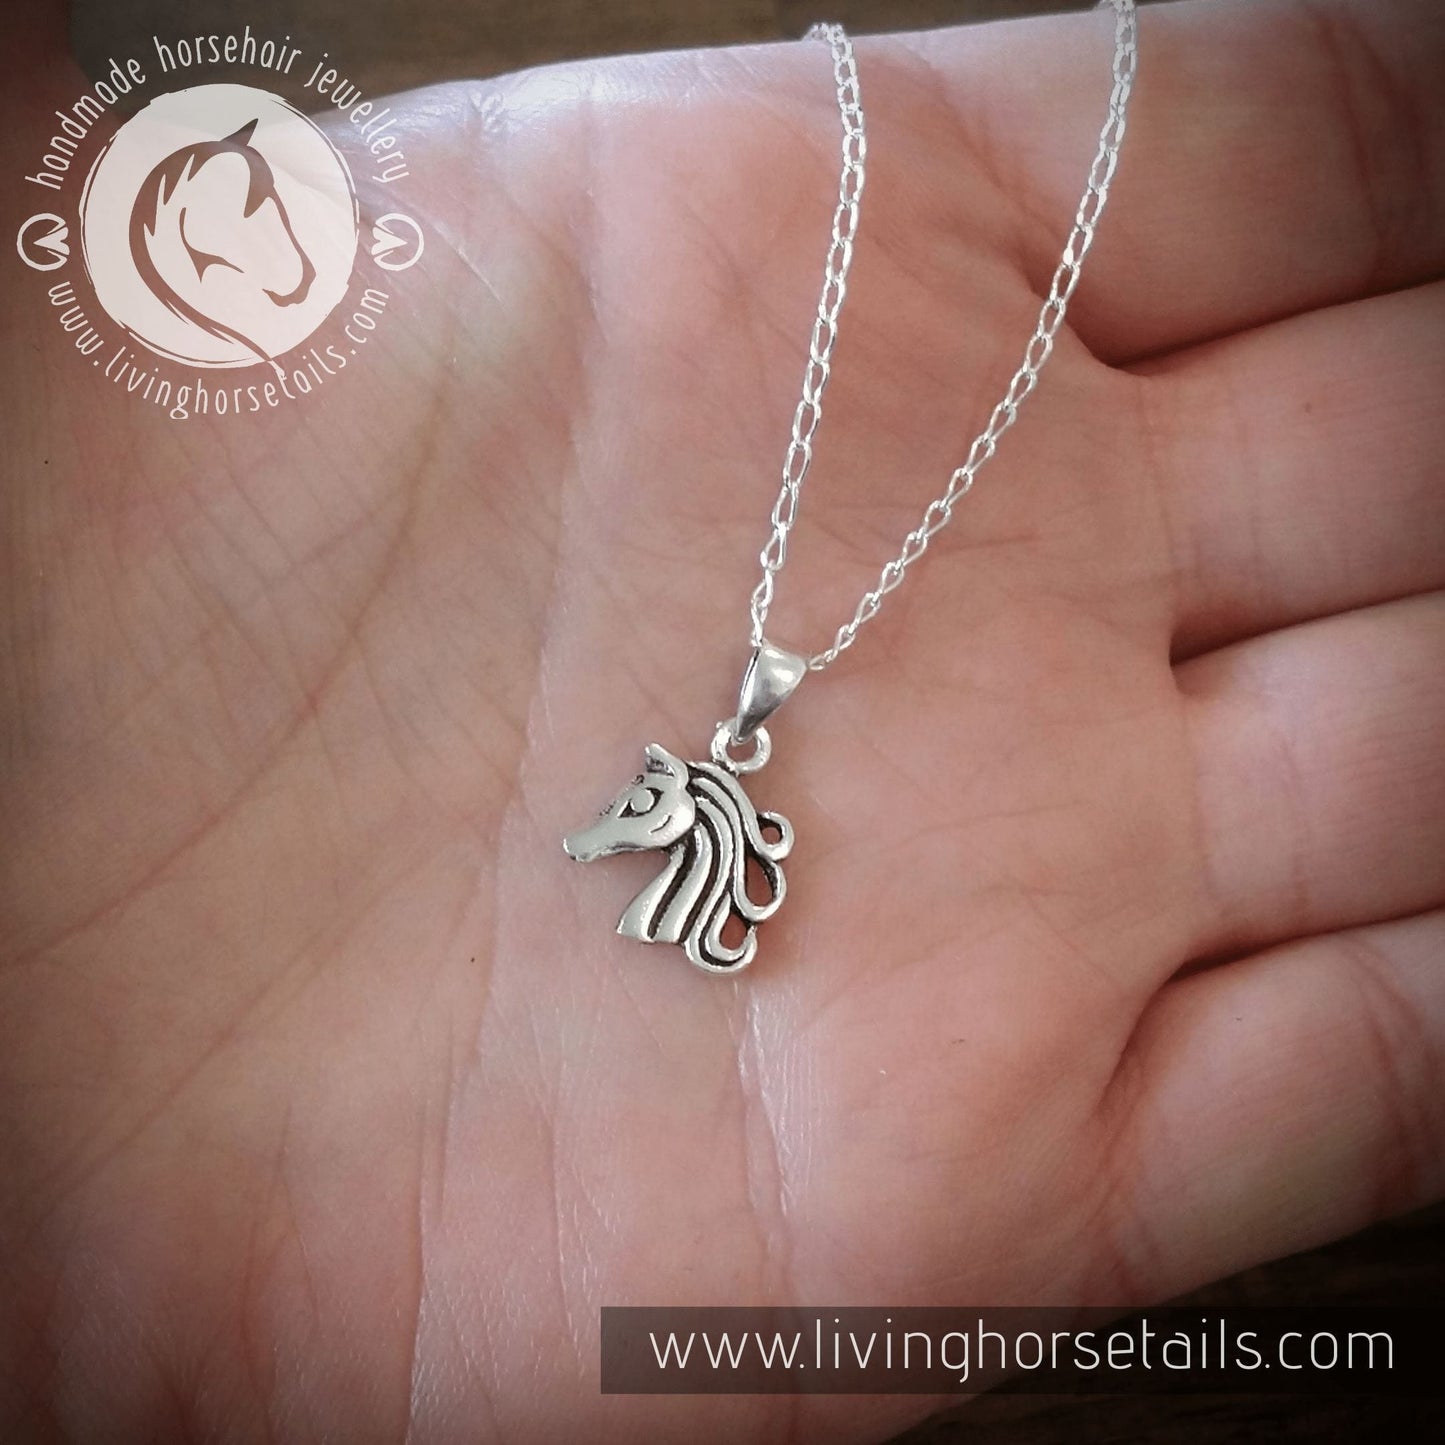 Load image into Gallery viewer, Living Horse Tails Sterling Silver Horse Charm Necklace Custom jewellery Monika Australia horsehair keepsake
